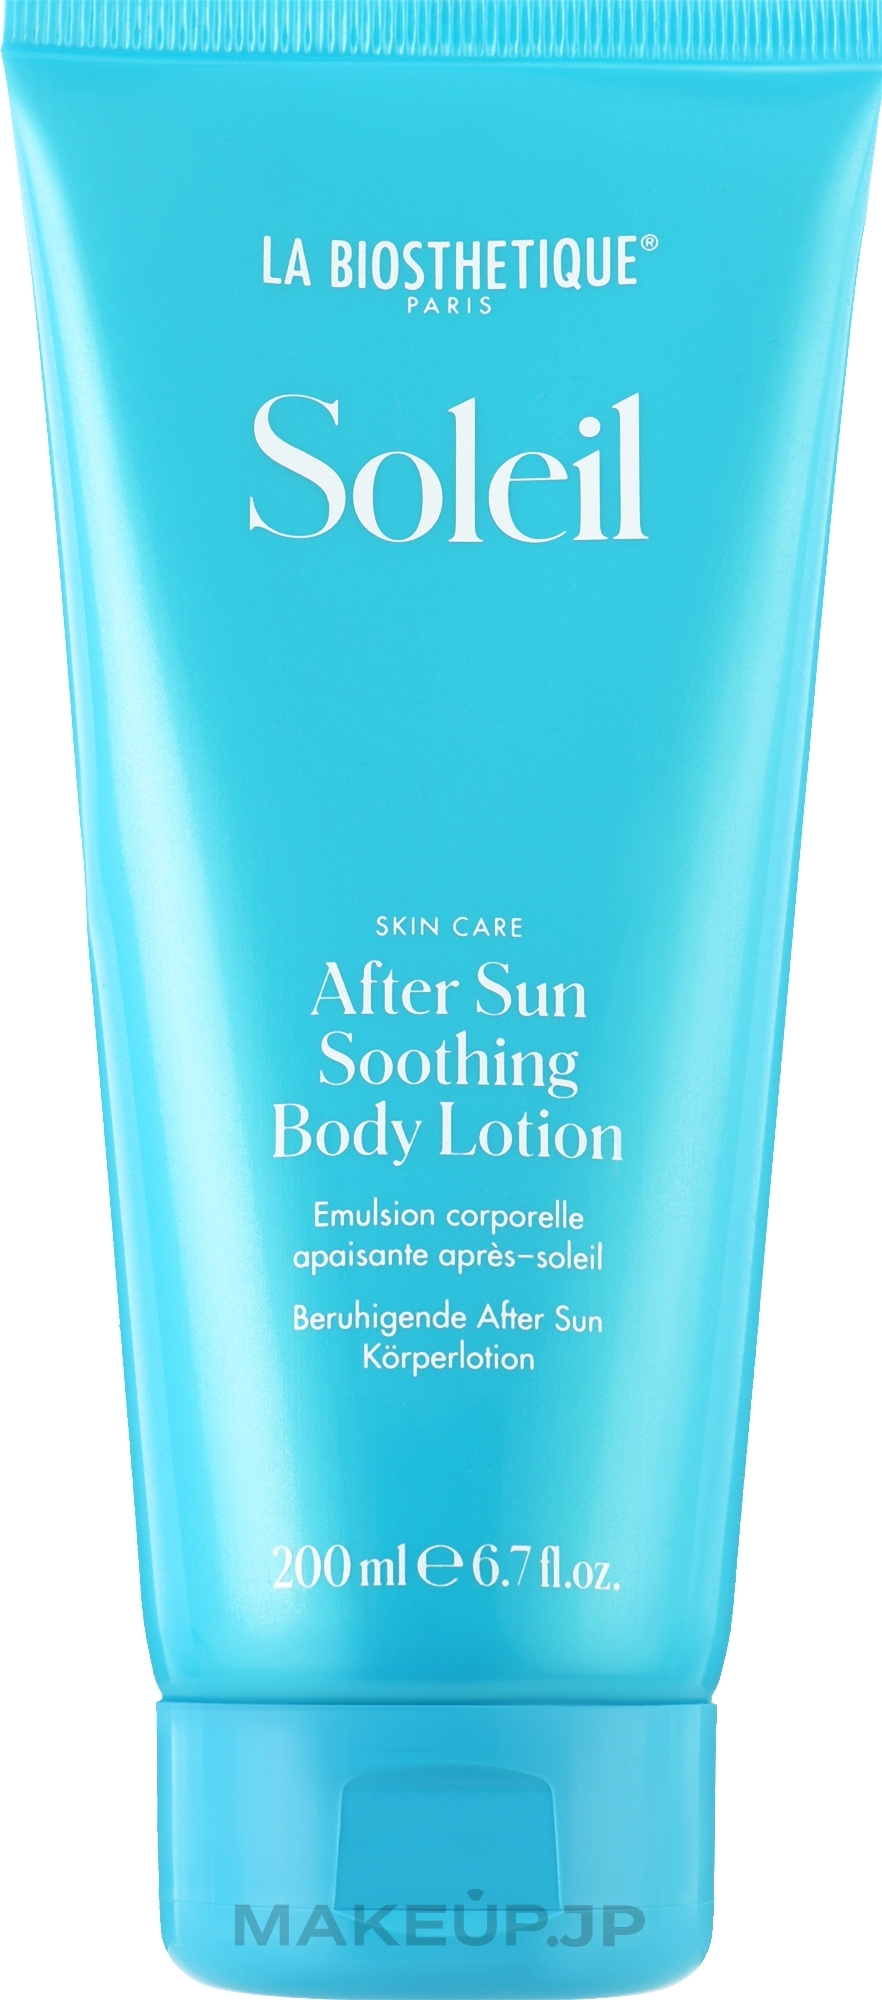 Soothing After Sun Body Lotion - La Biosthetique Soleil After Sun Soothing Body Lotion — photo 200 ml